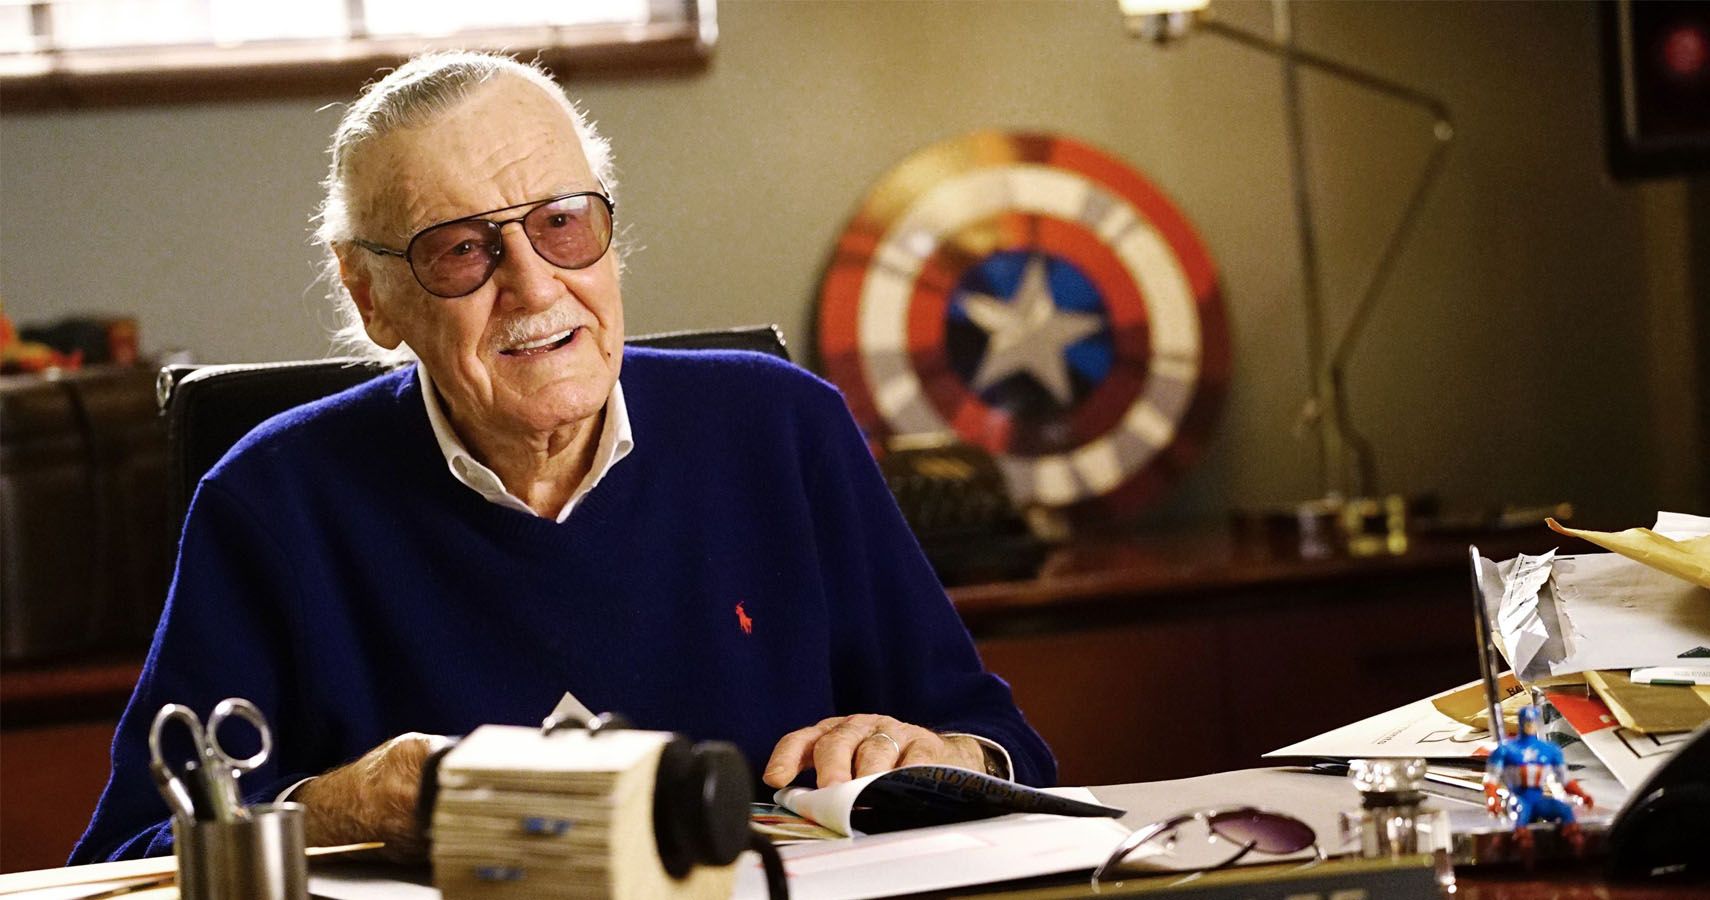 Stan Lee's Net Worth Before Death Was Estimated At Only $50 Million